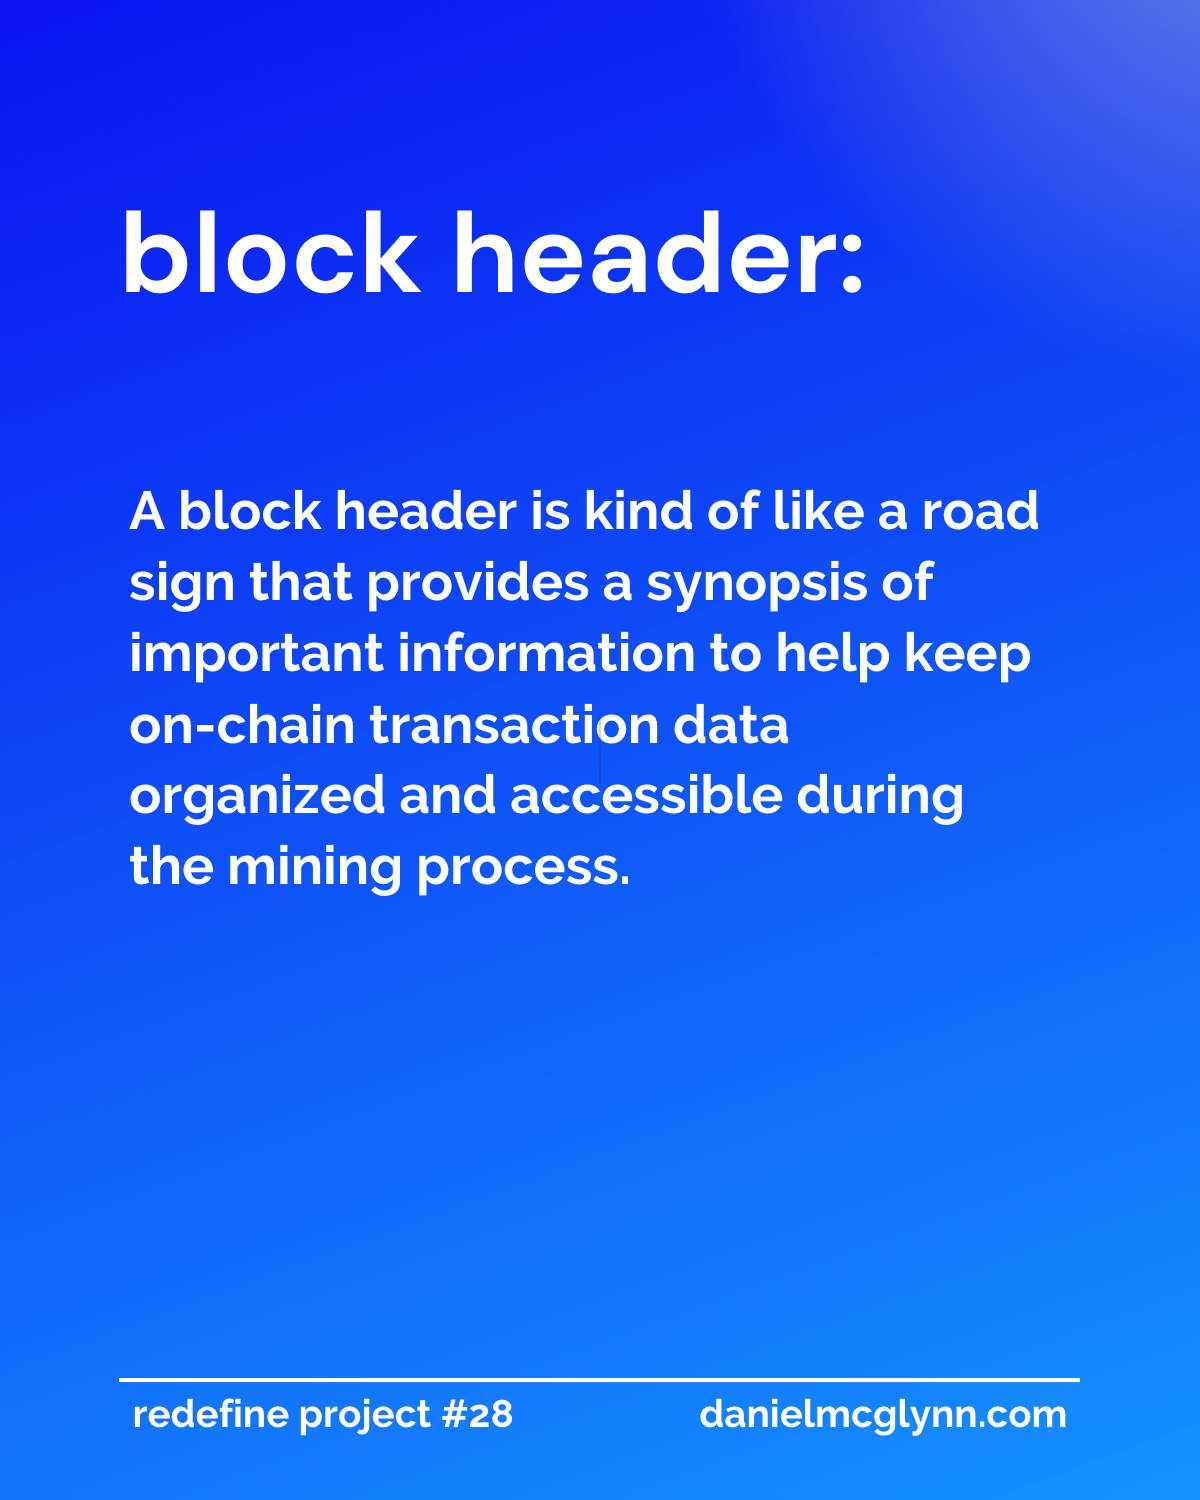 A block header plays an important role in blockchain architecture.